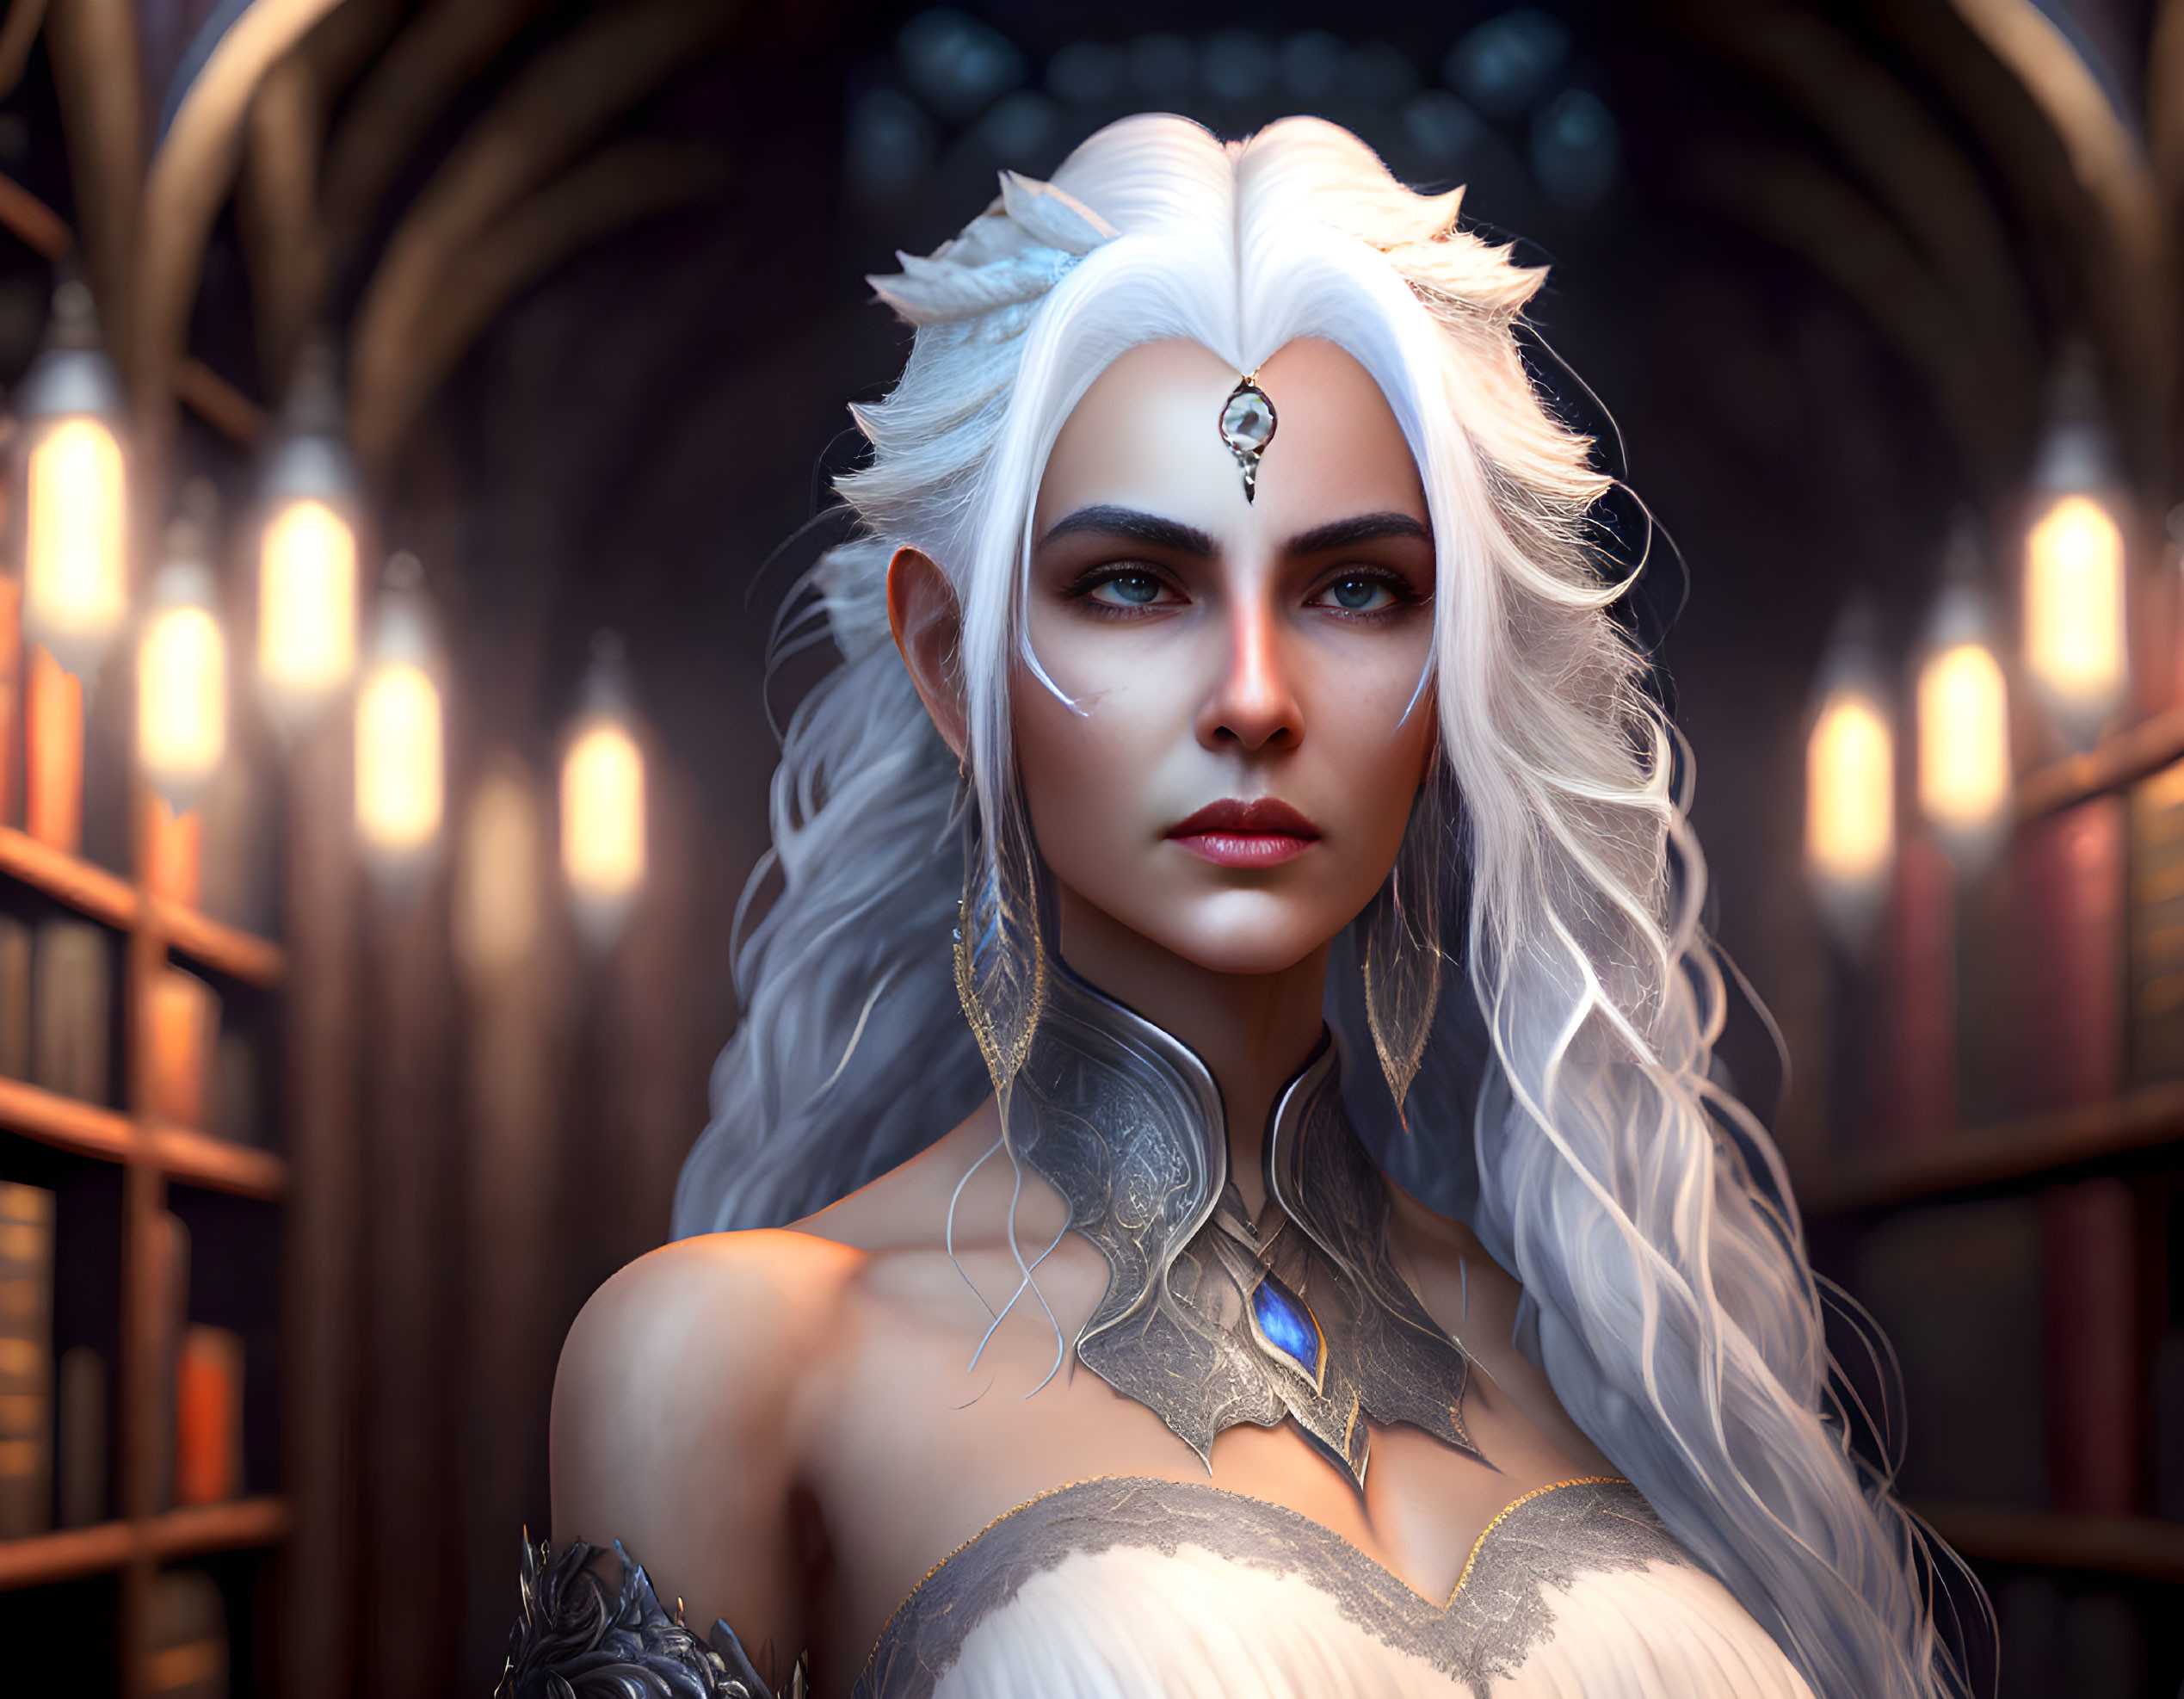 Fantasy female character with white hair, jewel-encrusted crown, and ornate shoulder armor